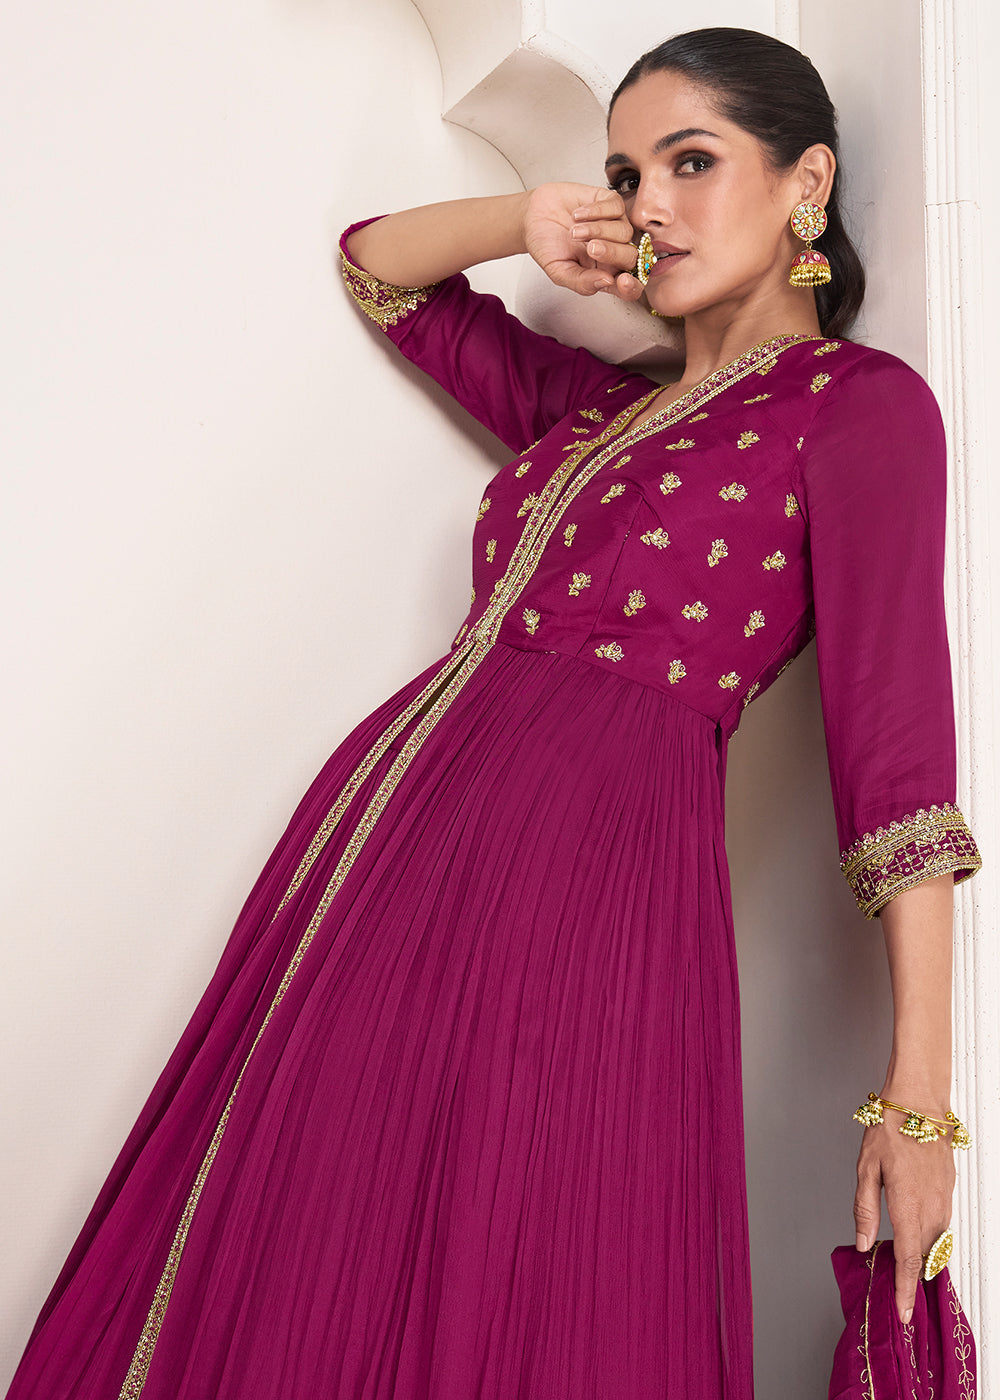 Buy Now Party Magenta Plum Embroidered Skirt Style Anarkali Suit Online in USA, UK, Australia, New Zealand, Canada & Worldwide at Empress Clothing.